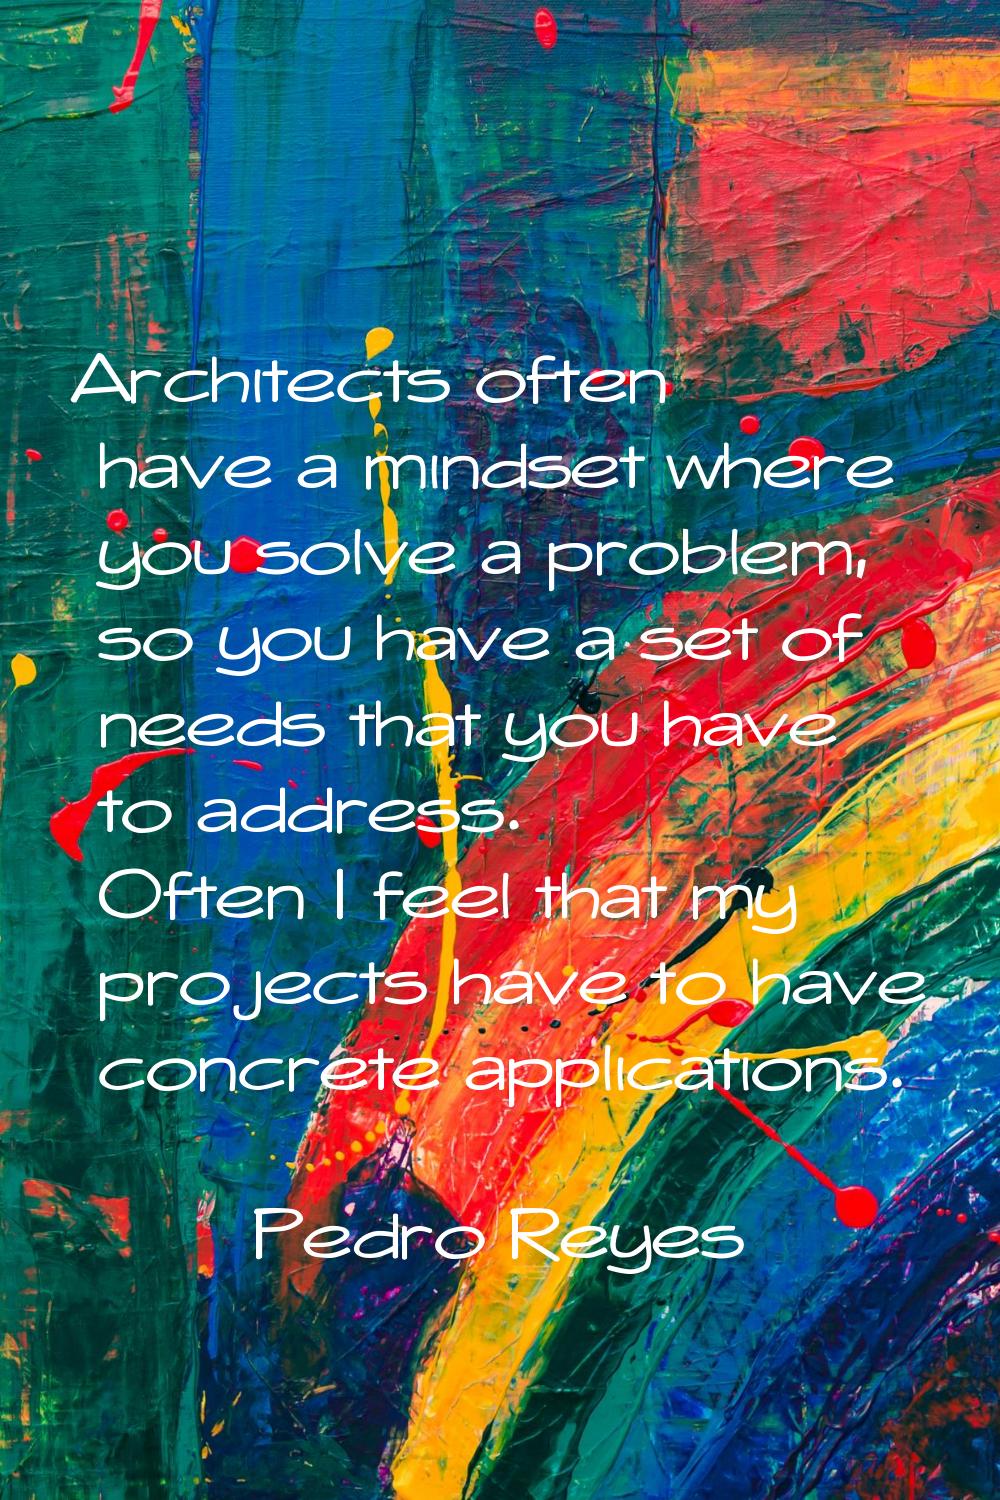 Architects often have a mindset where you solve a problem, so you have a set of needs that you have